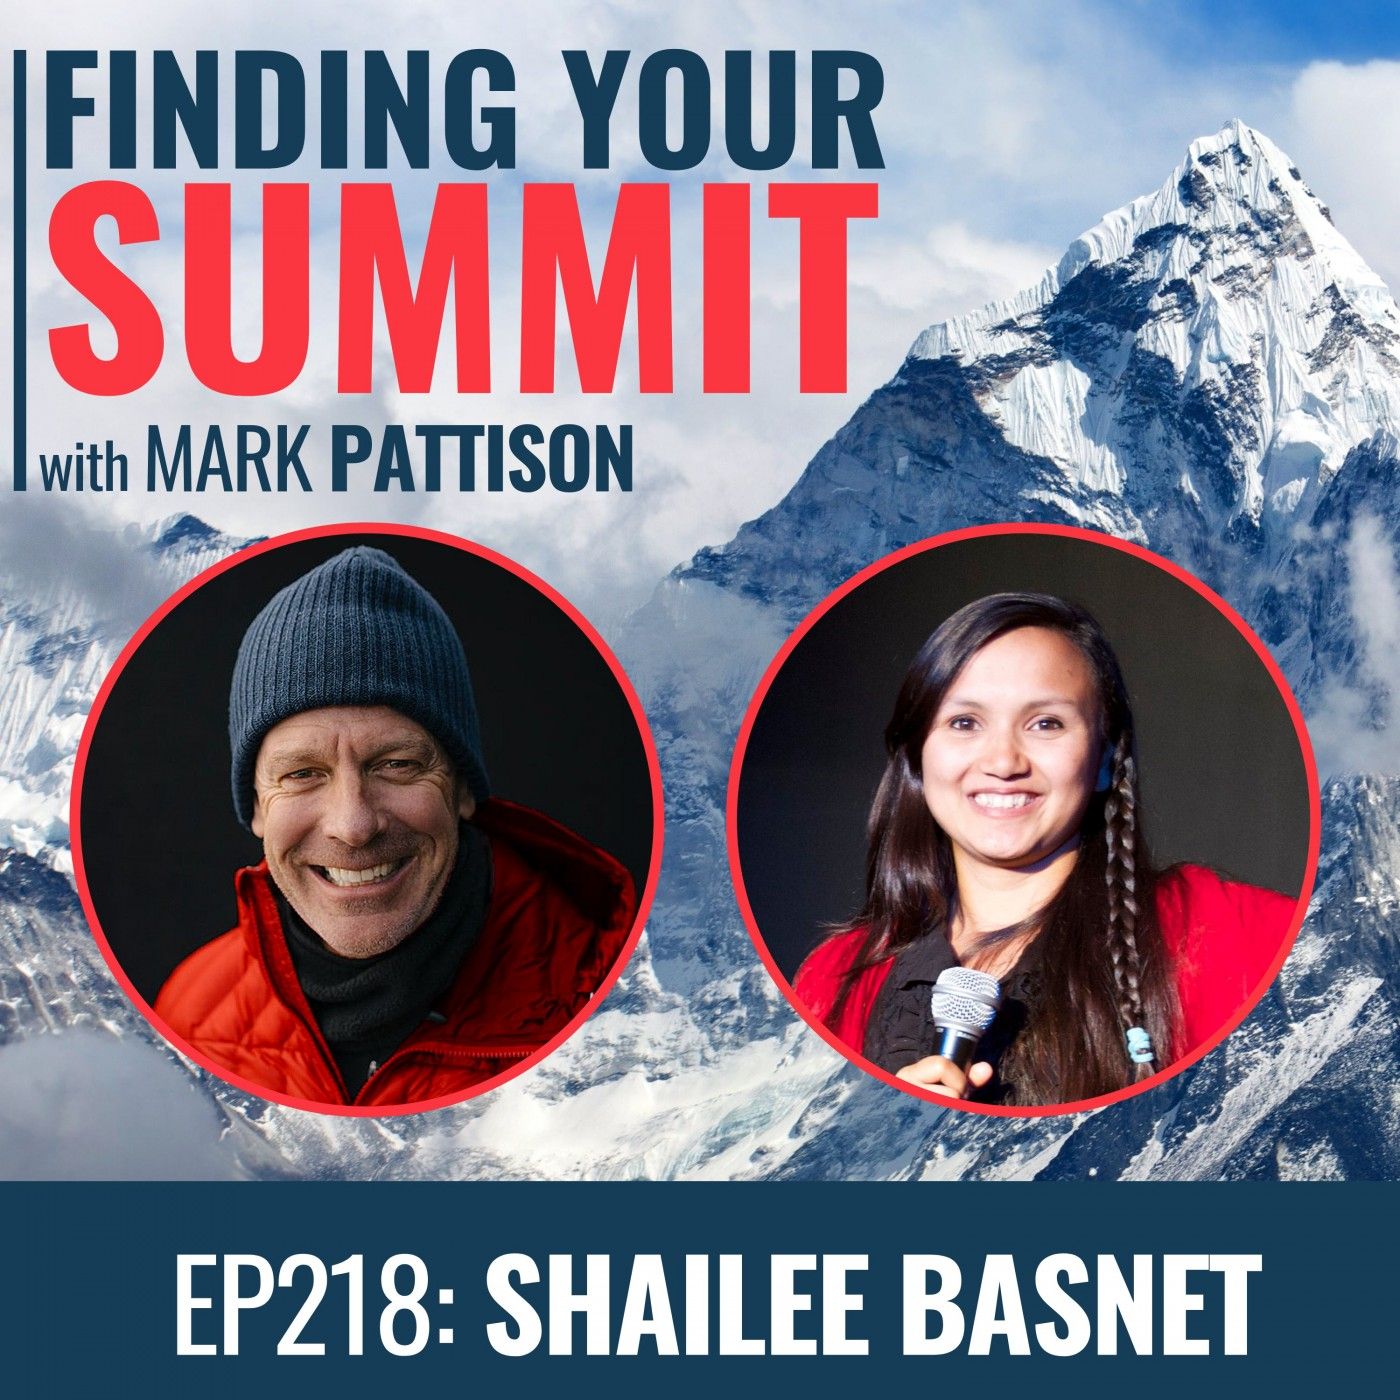 EP 218:  Shailee Basnet changing the world from Nepal